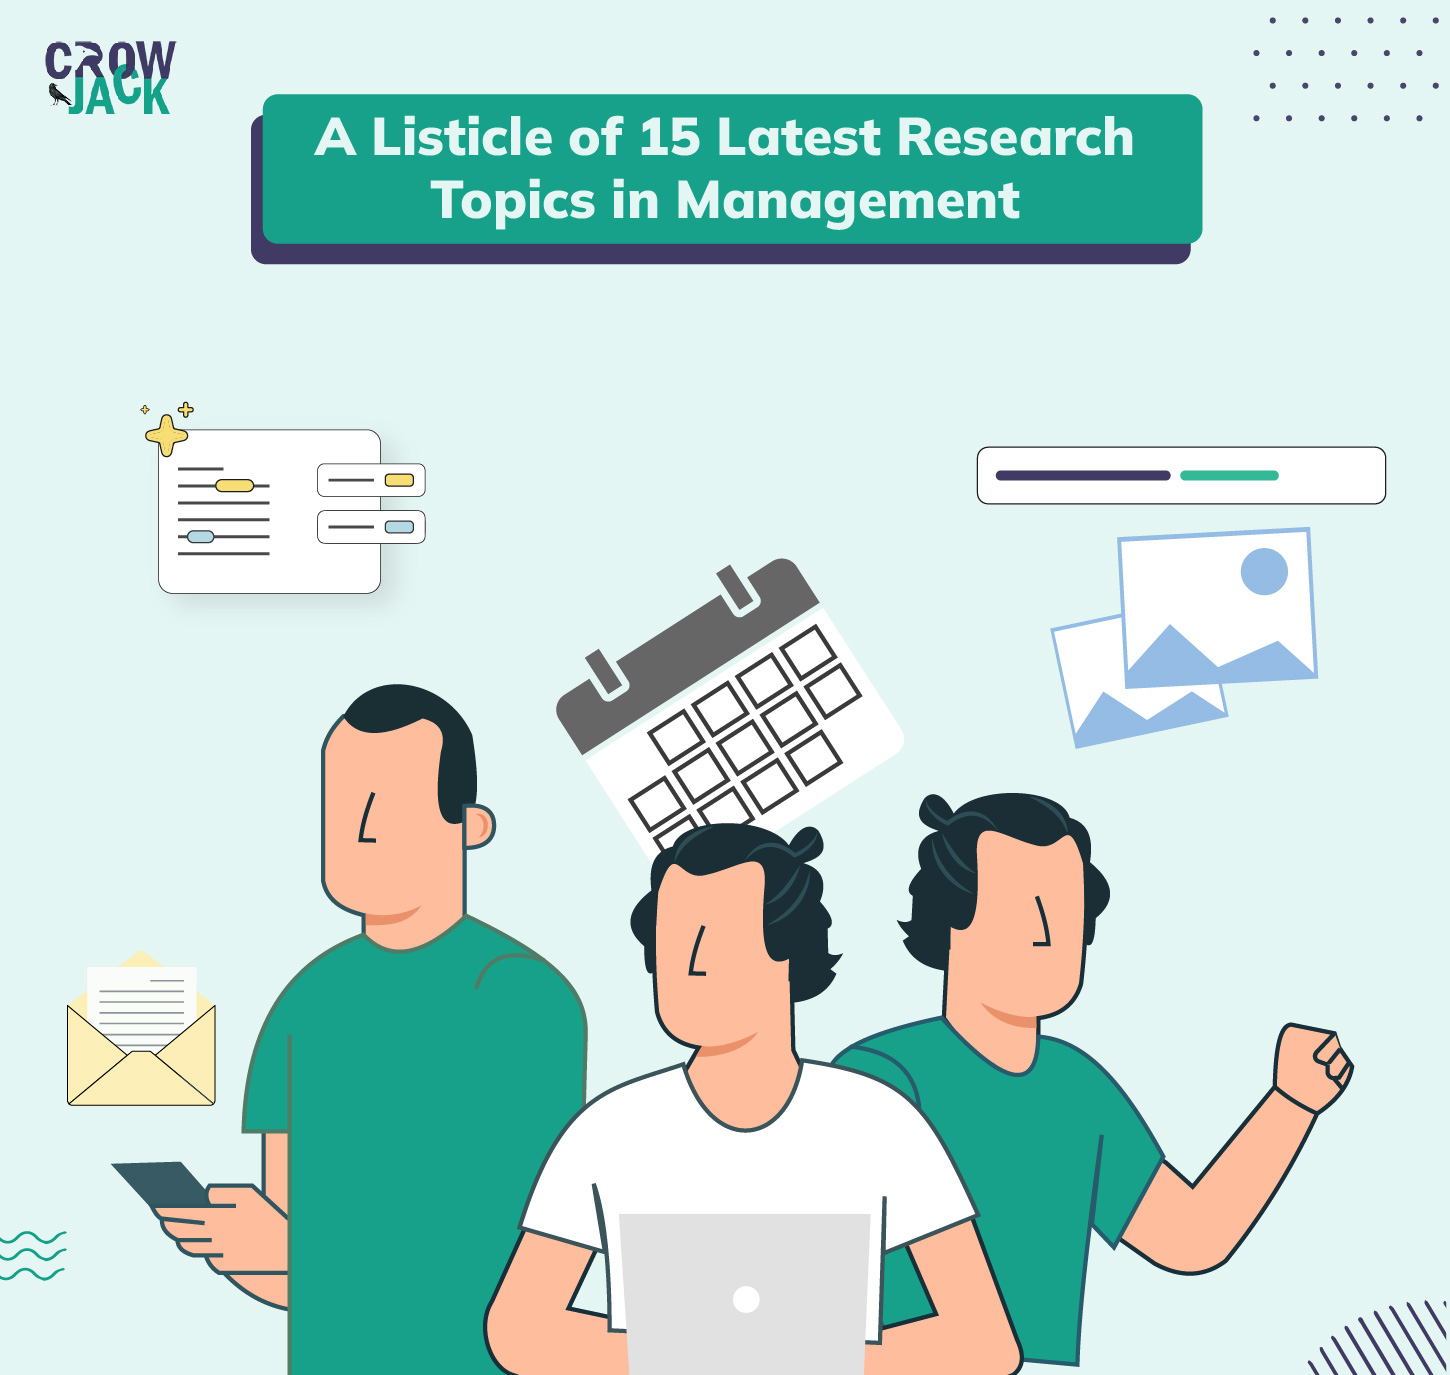 A Listicle of 15 Latest Research Topics in Management